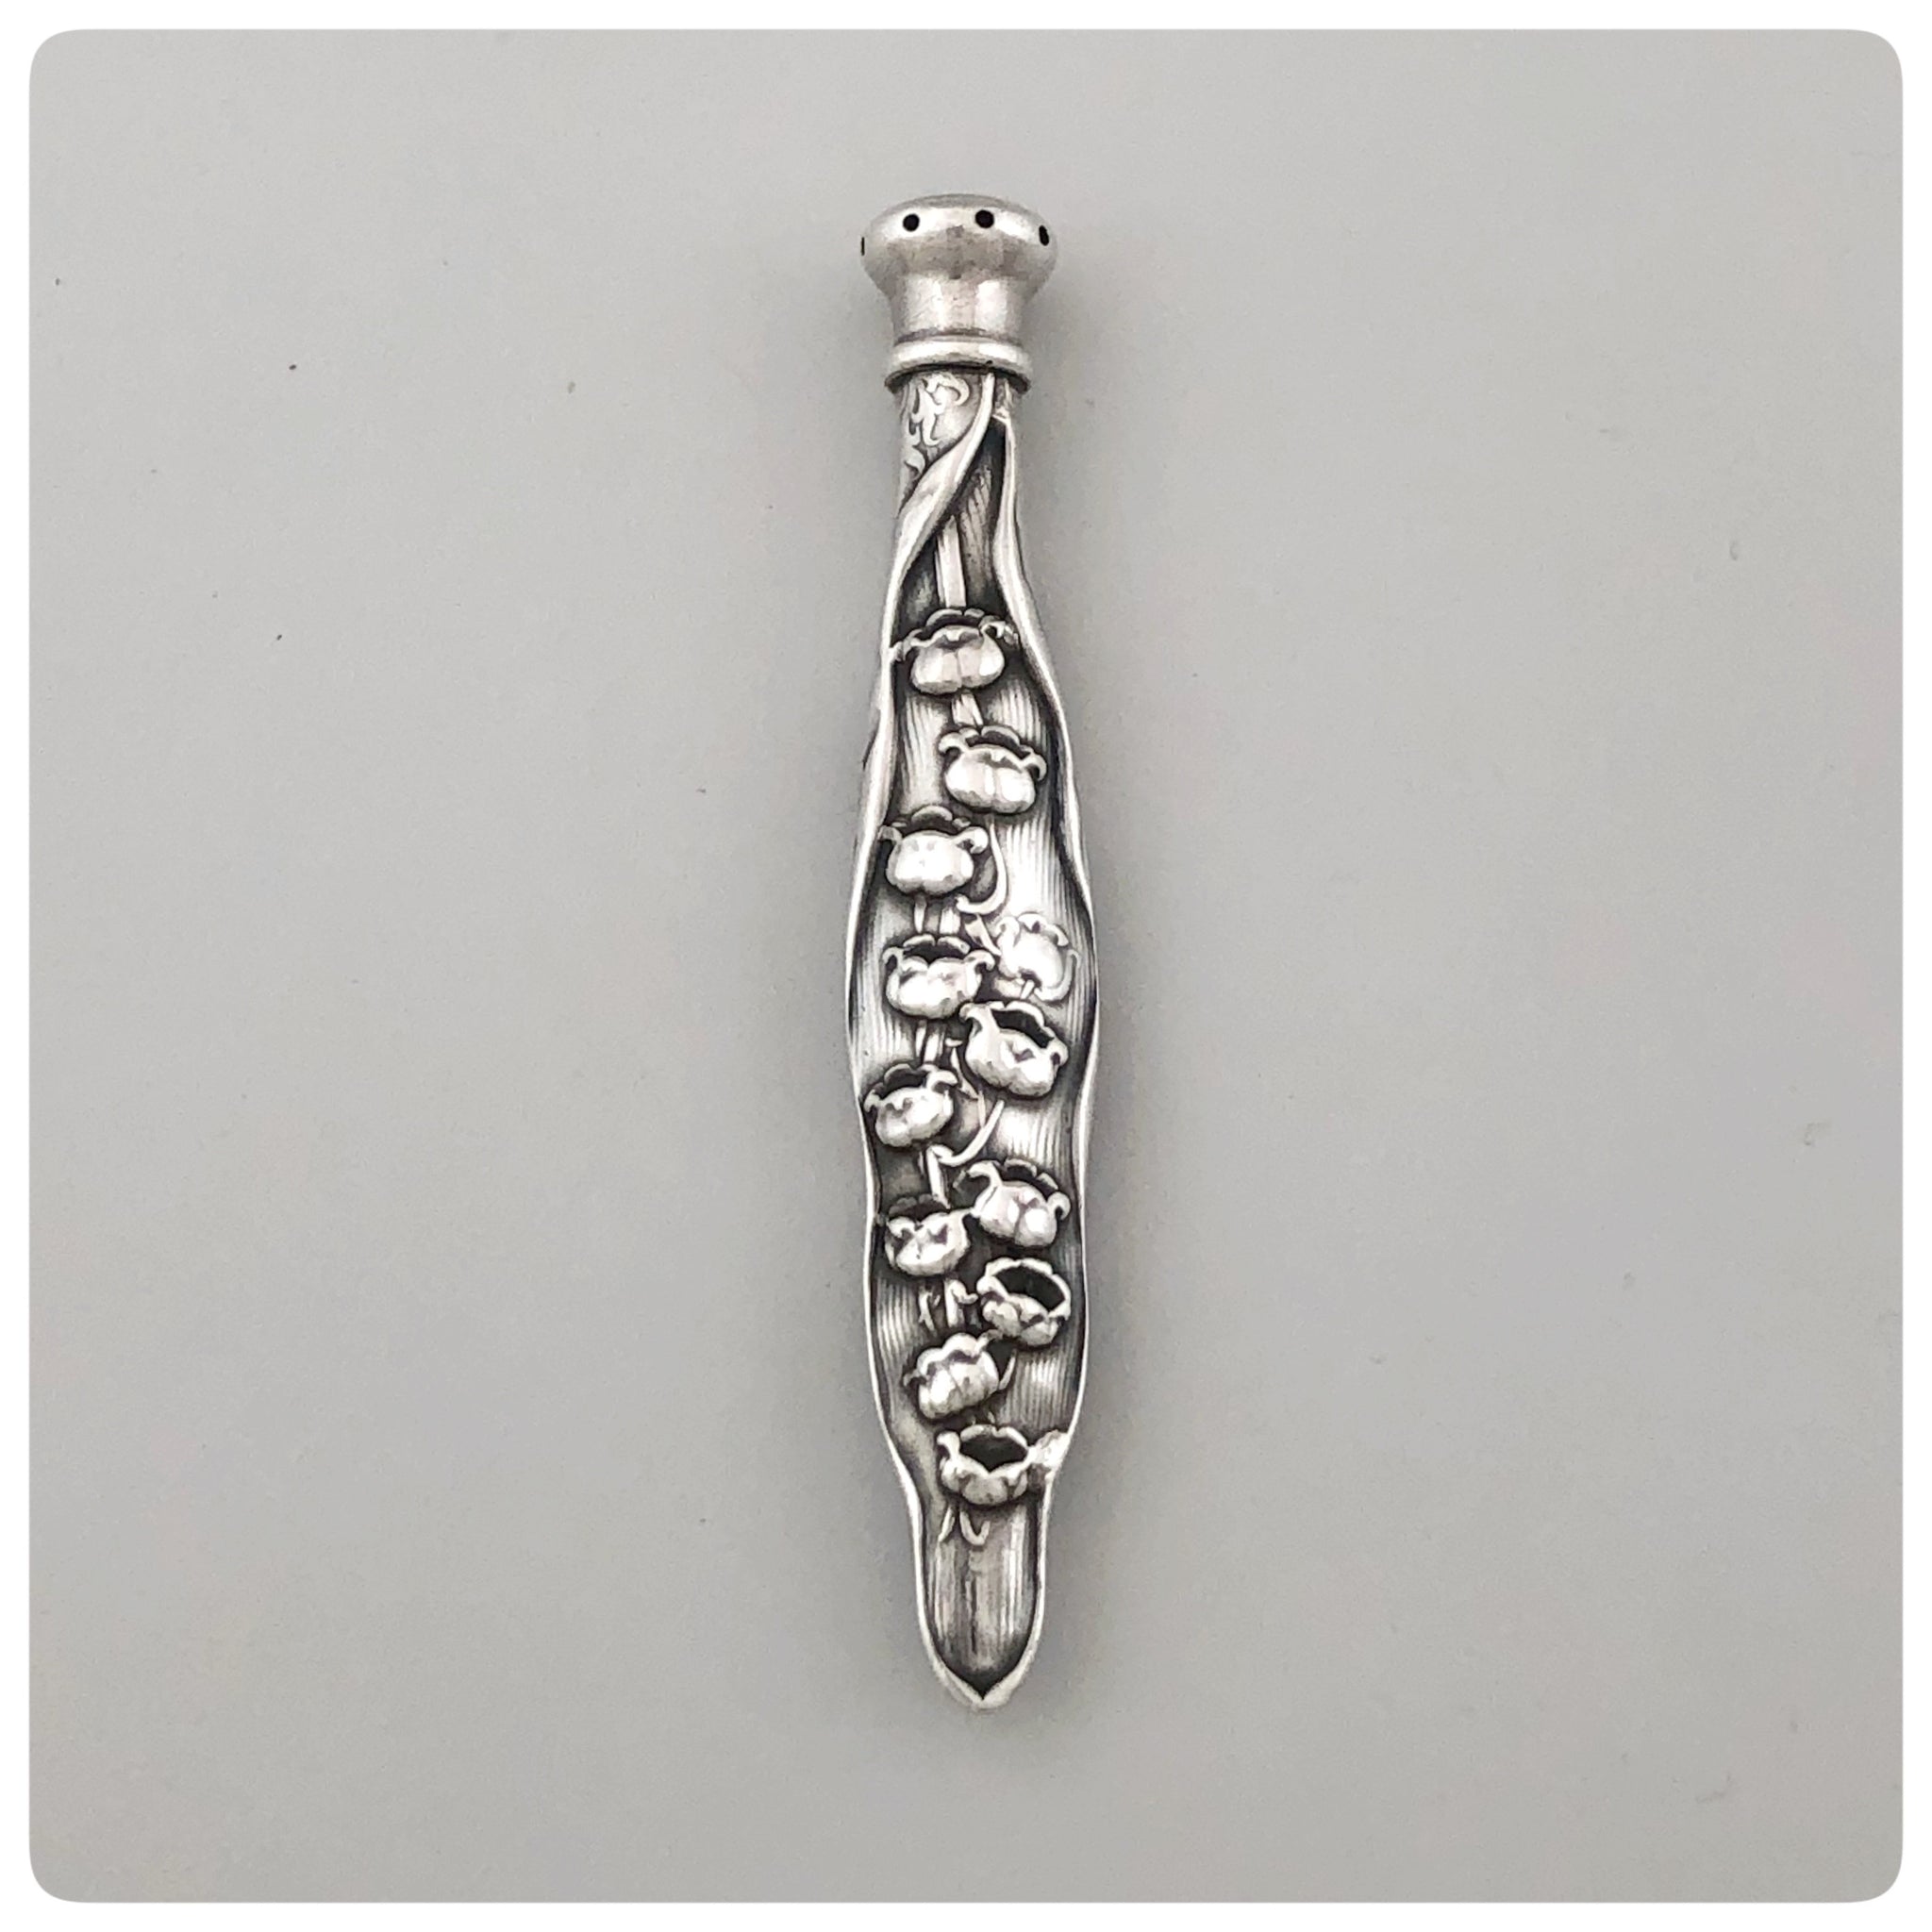 Sterling Silver Perfume Bottle / Vial in "Lily of the Valley", Whiting Manufacturing Company, New York, NY, Pat. 1885 - The Silver Vault of Charleston